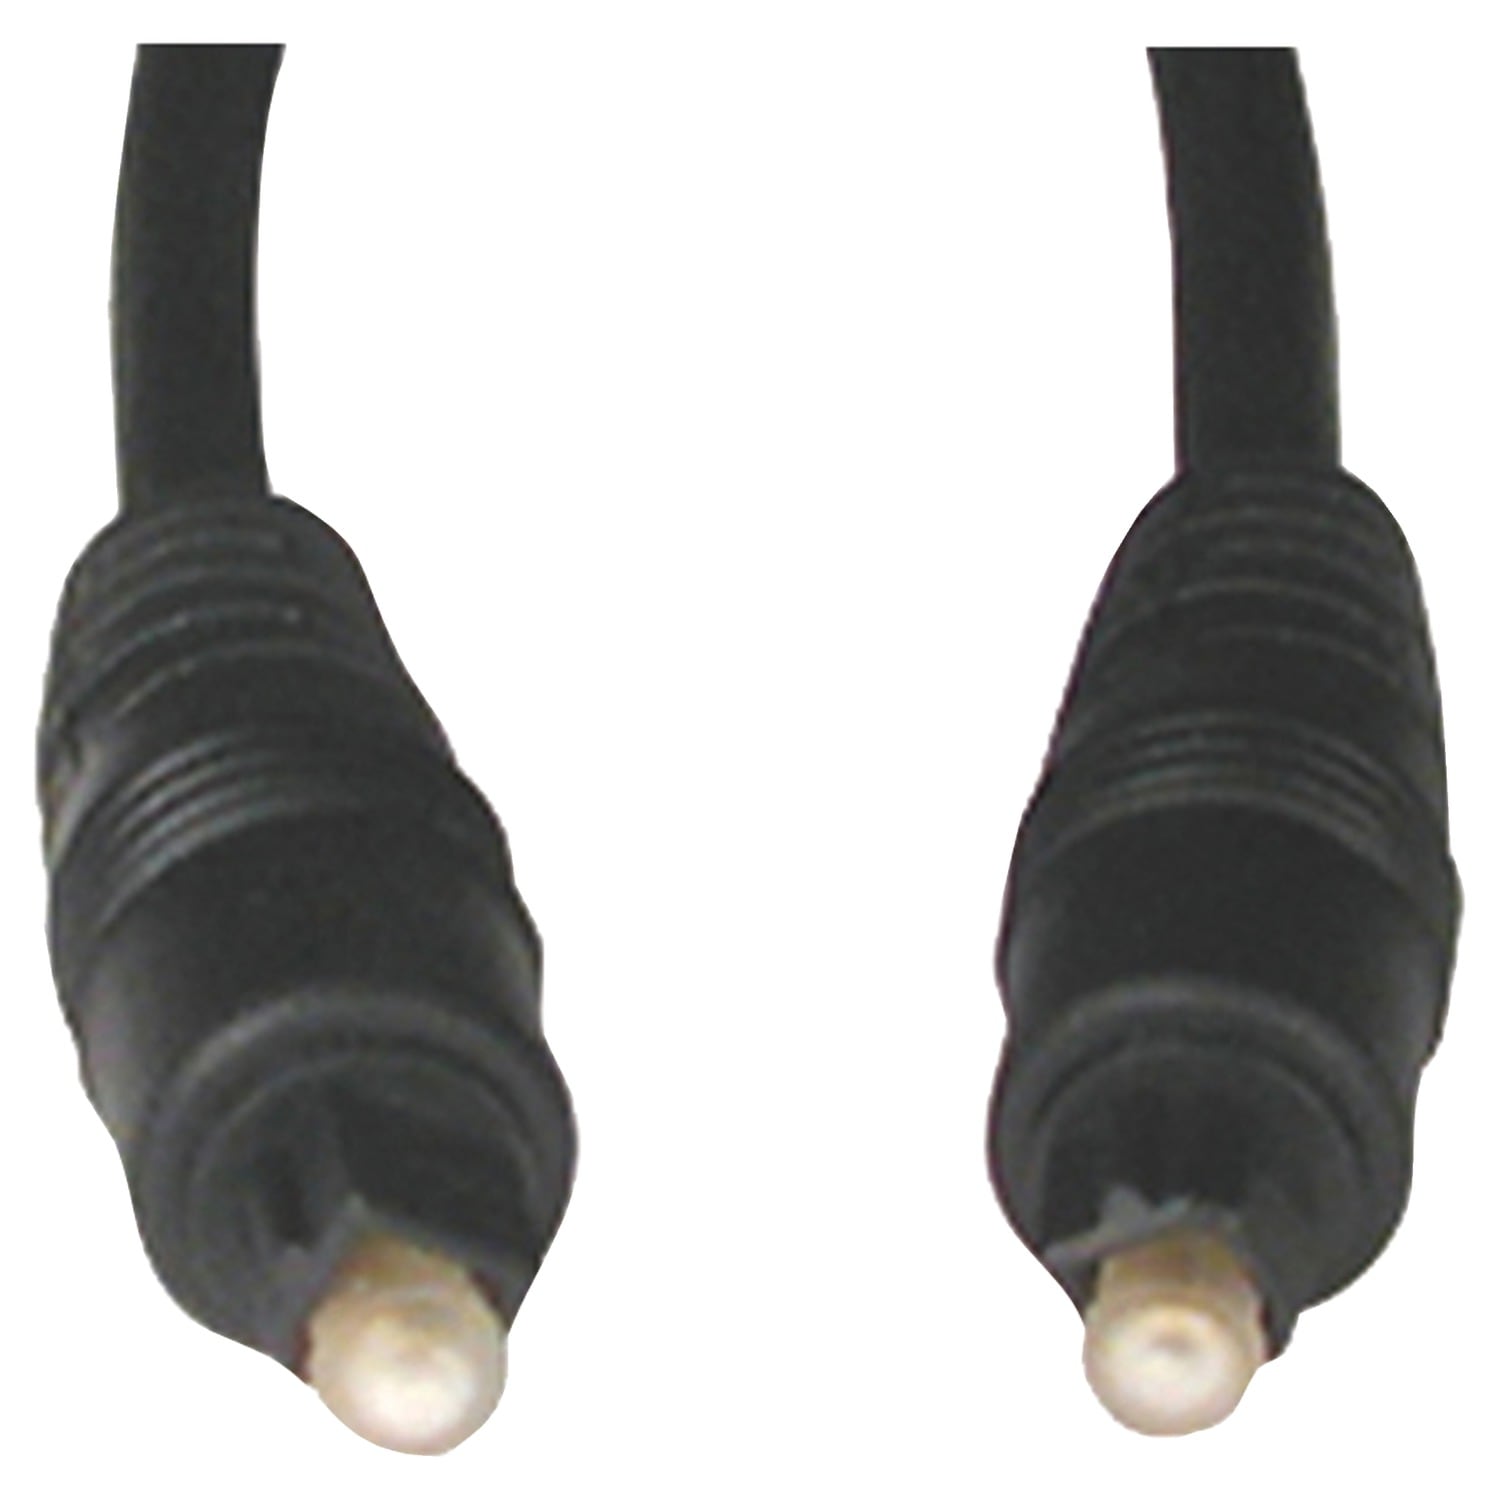 GE 6ft. Video/Audio Cable with RCA-Type Connectors, Black